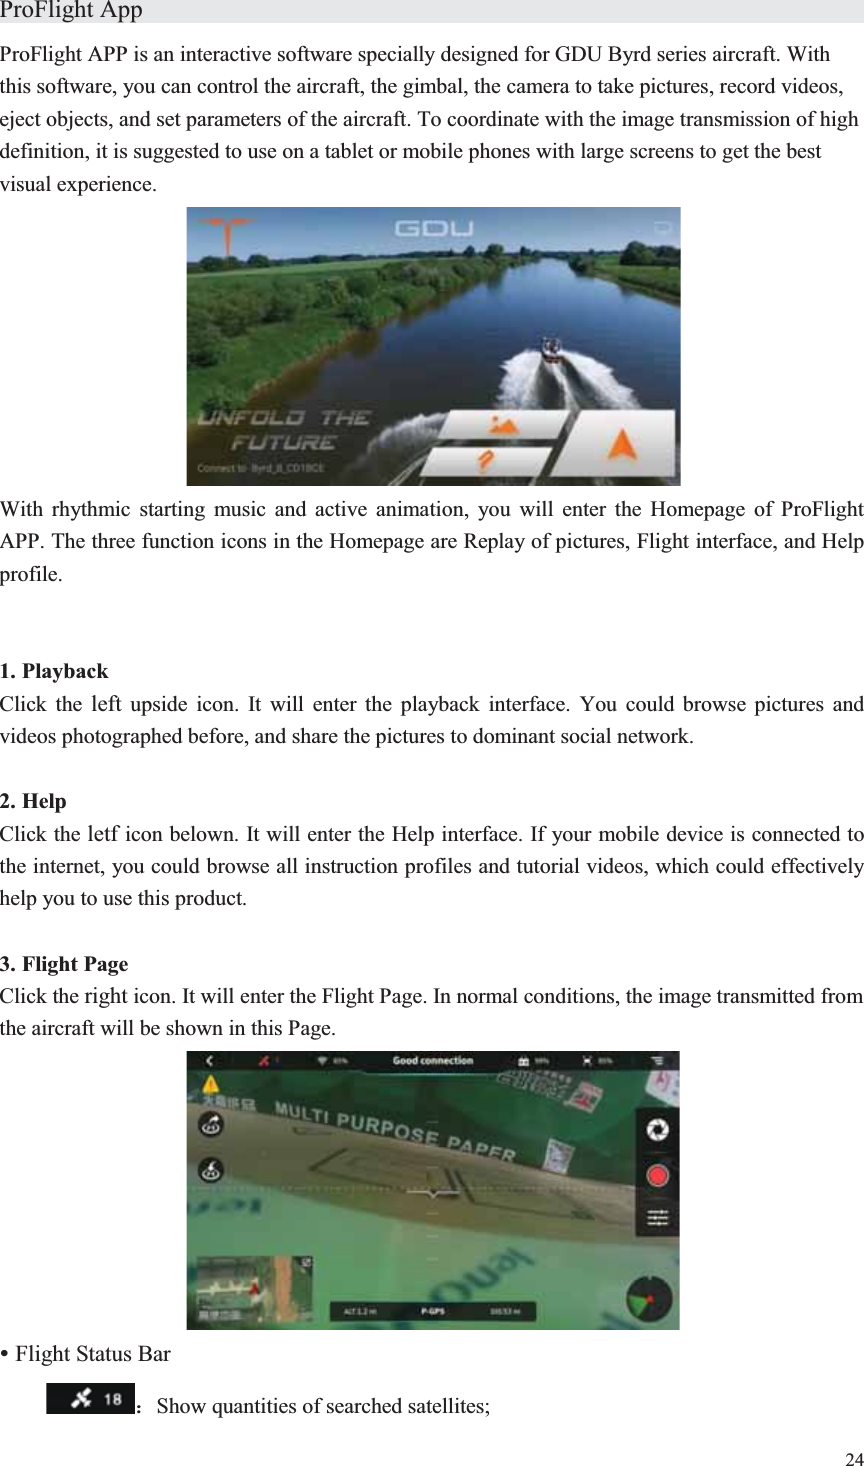 24  ProFlight App                    ProFlight APP is an interactive software specially designed for GDU Byrd series aircraft. With this software, you can control the aircraft, the gimbal, the camera to take pictures, record videos, eject objects, and set parameters of the aircraft. To coordinate with the image transmission of high definition, it is suggested to use on a tablet or mobile phones with large screens to get the best visual experience.  With rhythmic starting music and active animation, you will enter the Homepage of ProFlight APP. The three function icons in the Homepage are Replay of pictures, Flight interface, and Help profile.   1. Playback Click the left upside icon. It will enter the playback interface. You could browse pictures and videos photographed before, and share the pictures to dominant social network.  2. Help Click the letf icon belown. It will enter the Help interface. If your mobile device is connected to the internet, you could browse all instruction profiles and tutorial videos, which could effectively help you to use this product.  3. Flight Page Click the right icon. It will enter the Flight Page. In normal conditions, the image transmitted from the aircraft will be shown in this Page.  y Flight Status Bar  ˖Show quantities of searched satellites; 